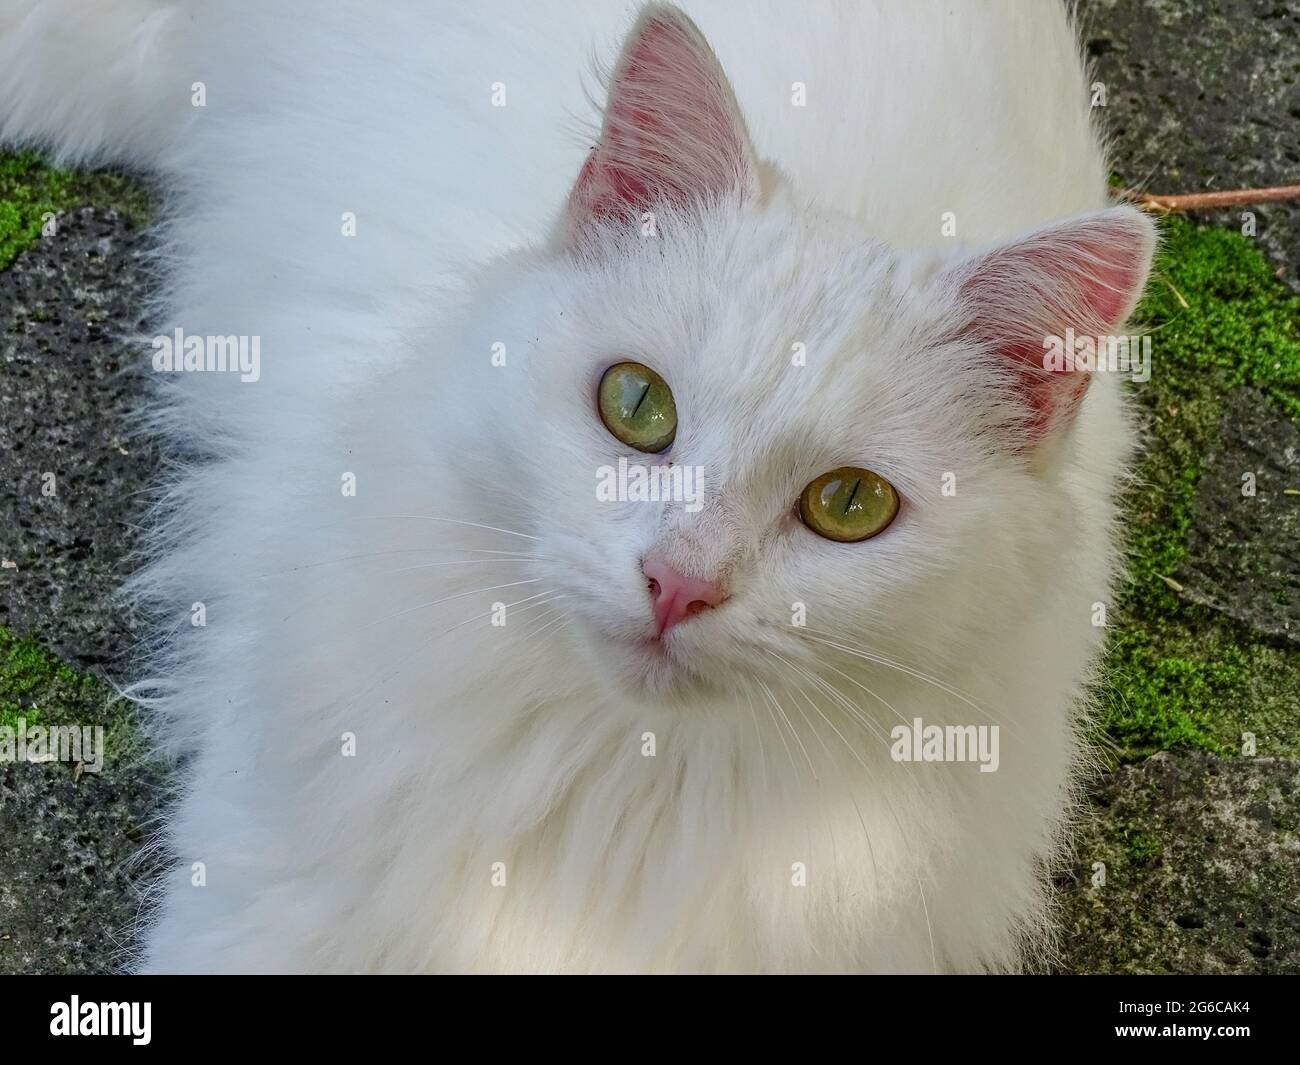 White cat with green eyes, looking in the camera, wonderful eyes. Cute and funny. Stock Photo